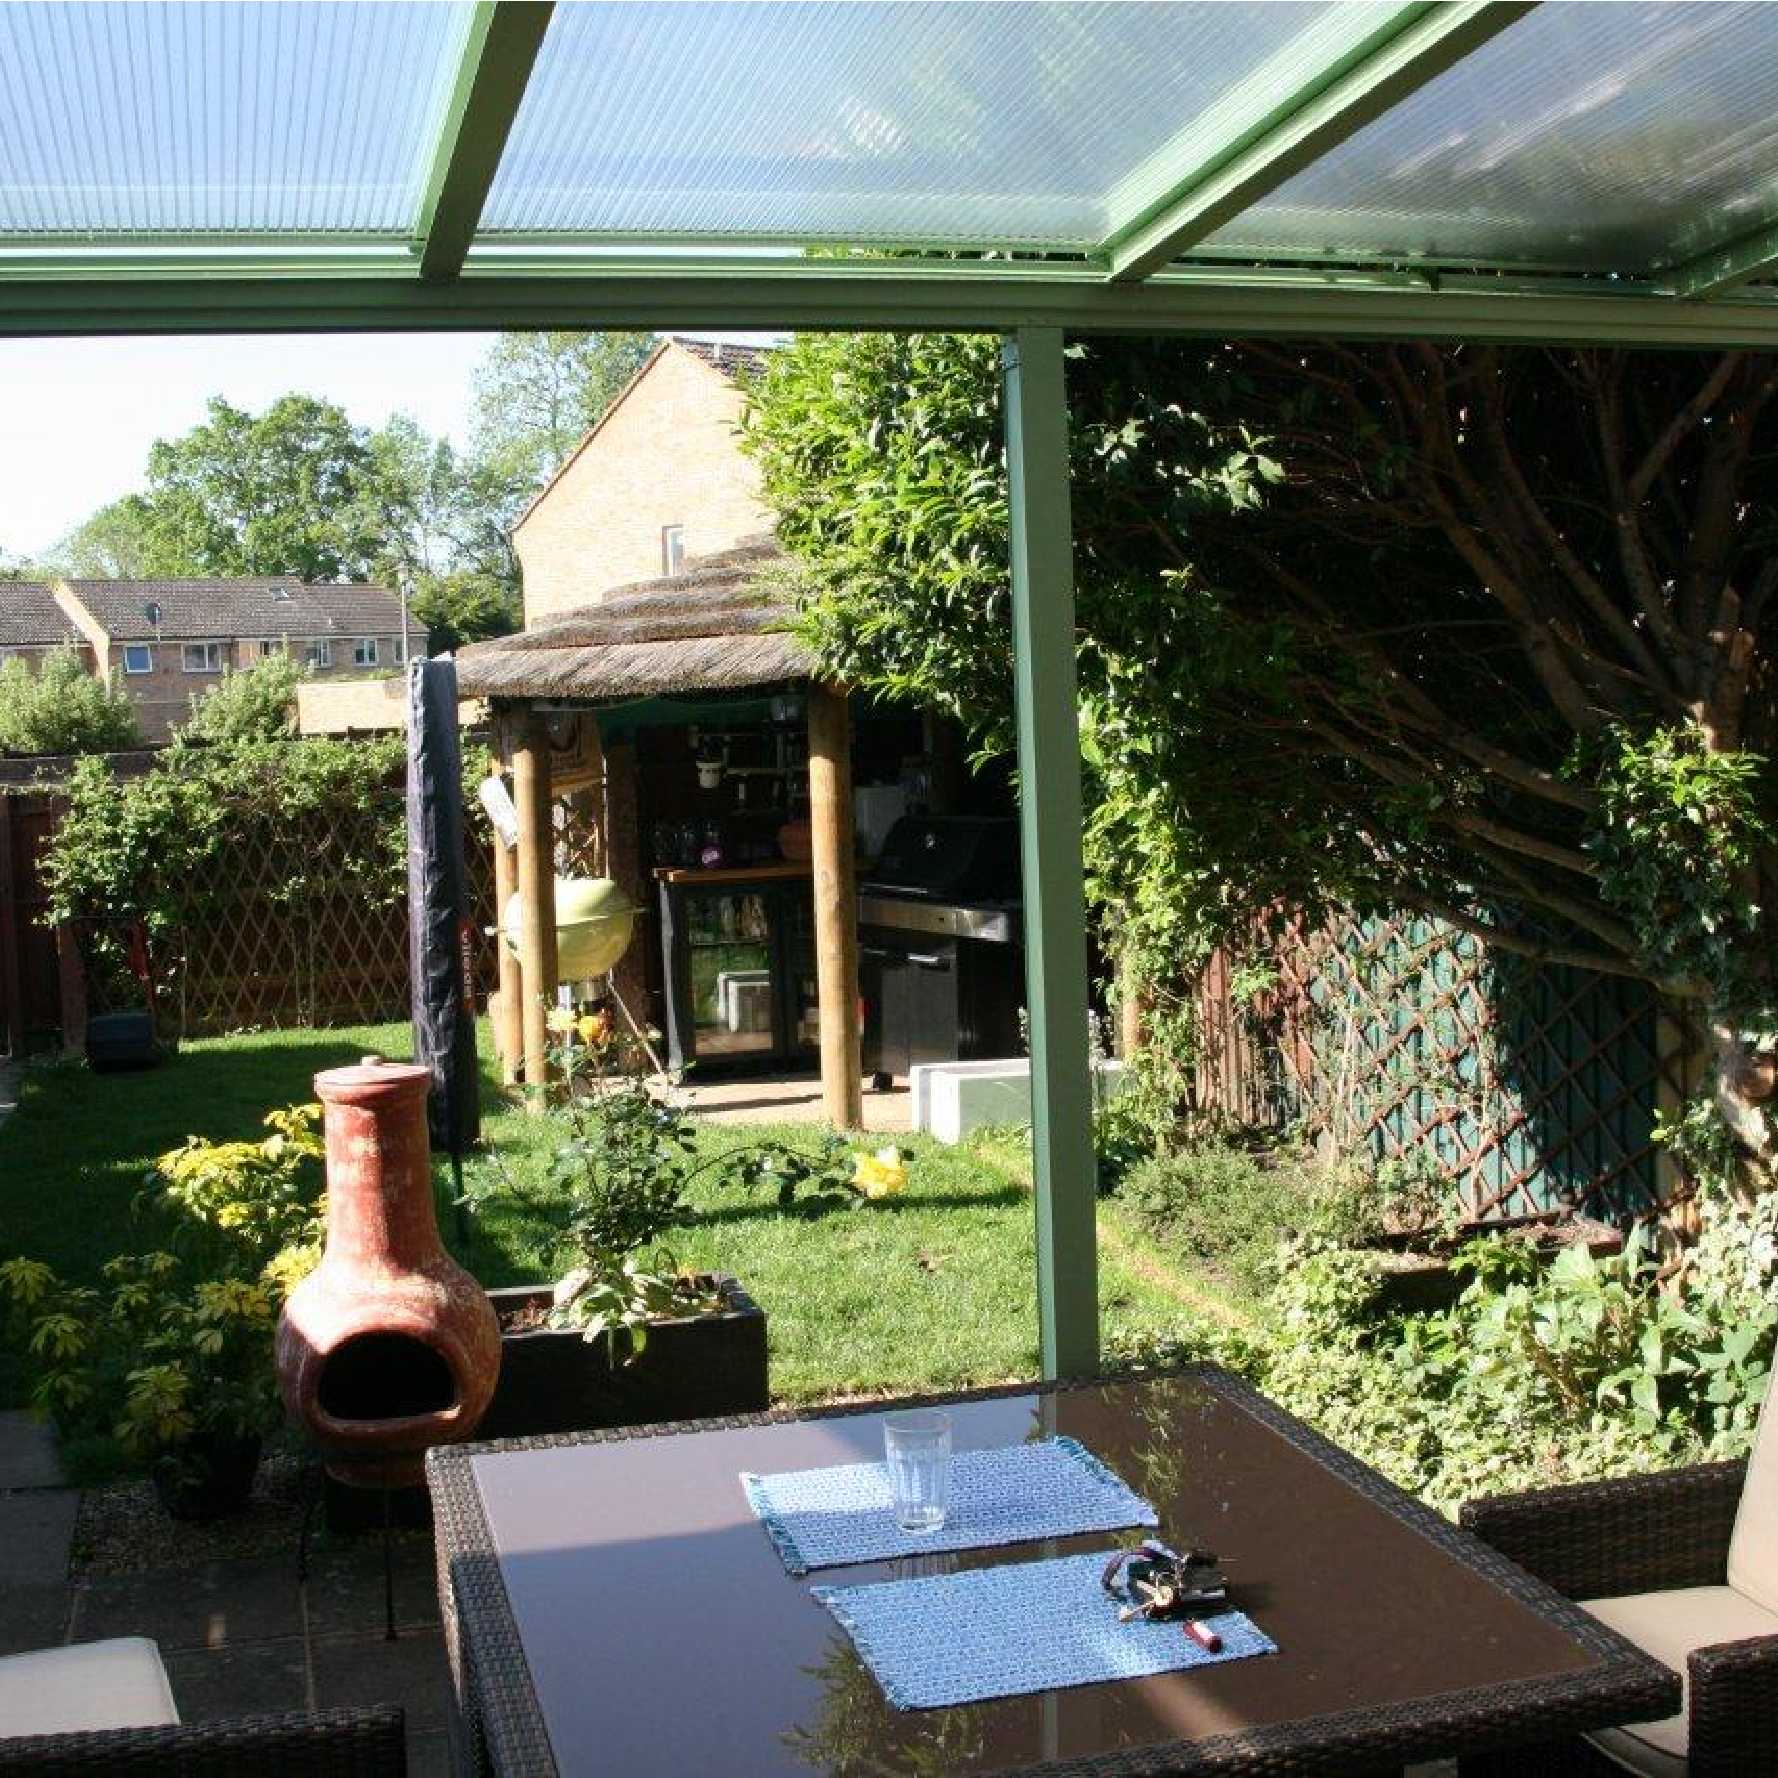 Affordable Omega Smart Lean-To Canopy, White with 16mm Polycarbonate Glazing - 10.6m (W) x 1.5m (P), (5) Supporting Posts